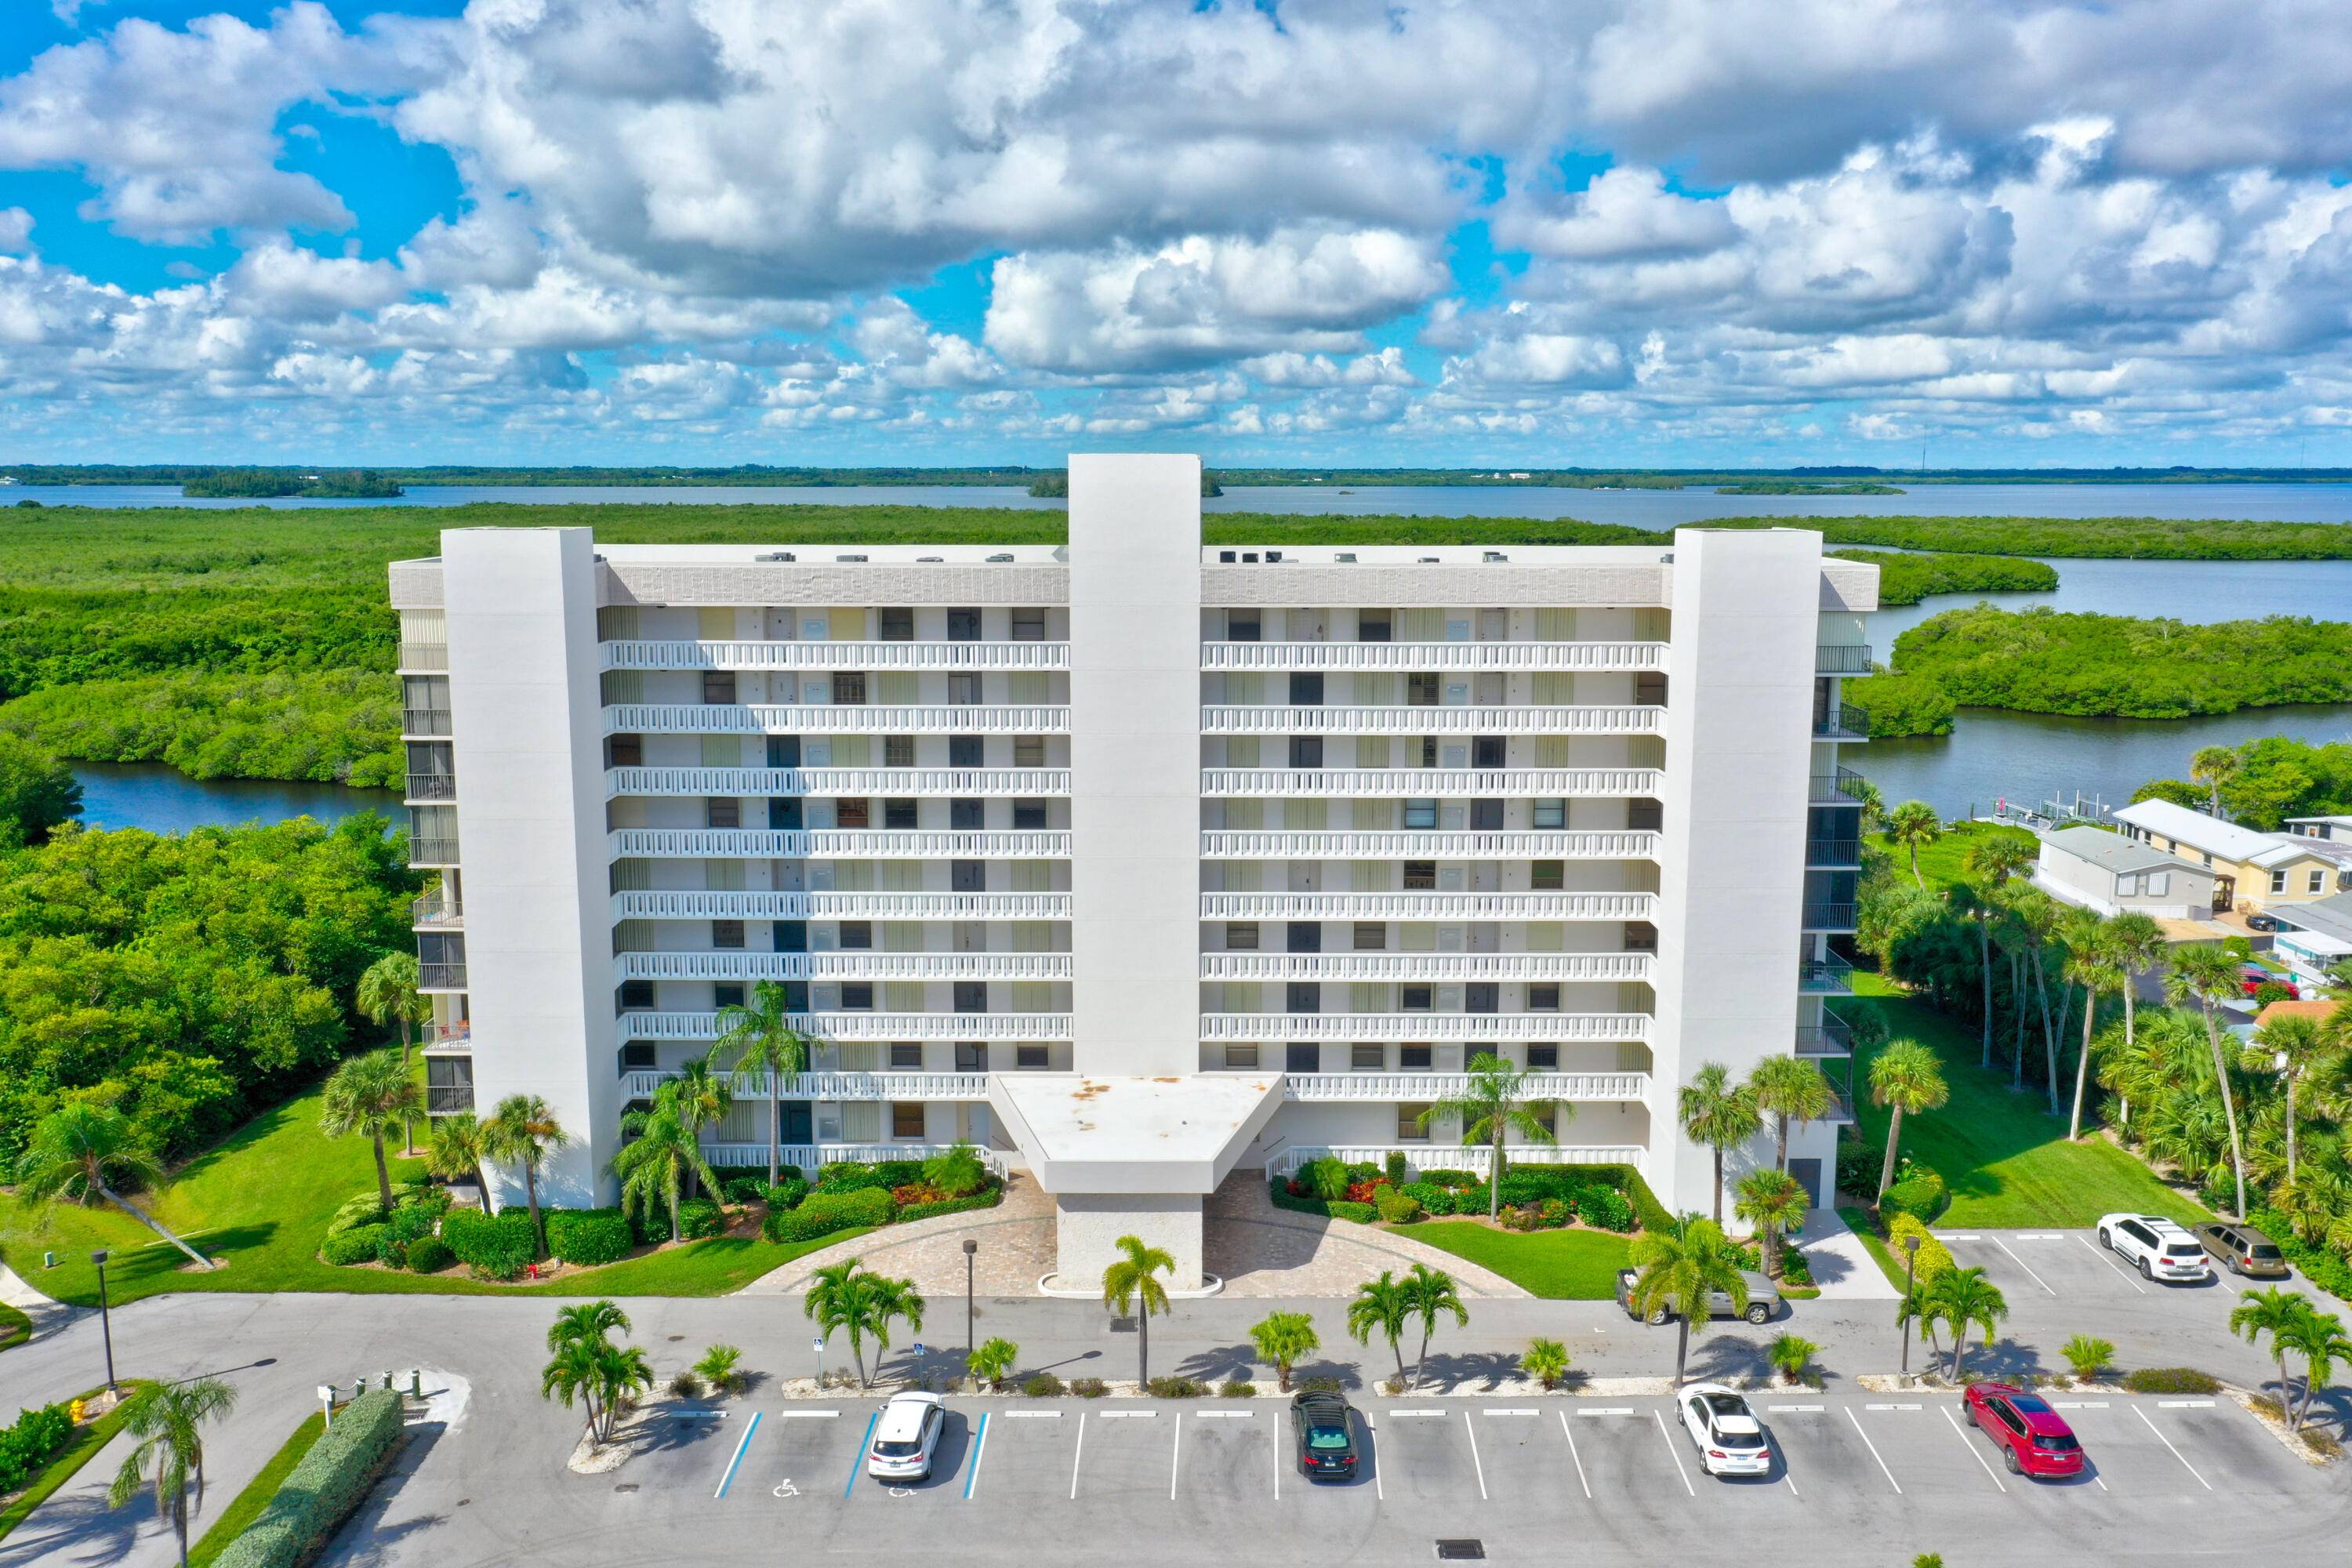 If you desire a luxurious escape to a magnificent tropical oasis, search no further than this exquisite two bedroom, two bathroom condominium nestled on the captivating North Hutchinson Island.